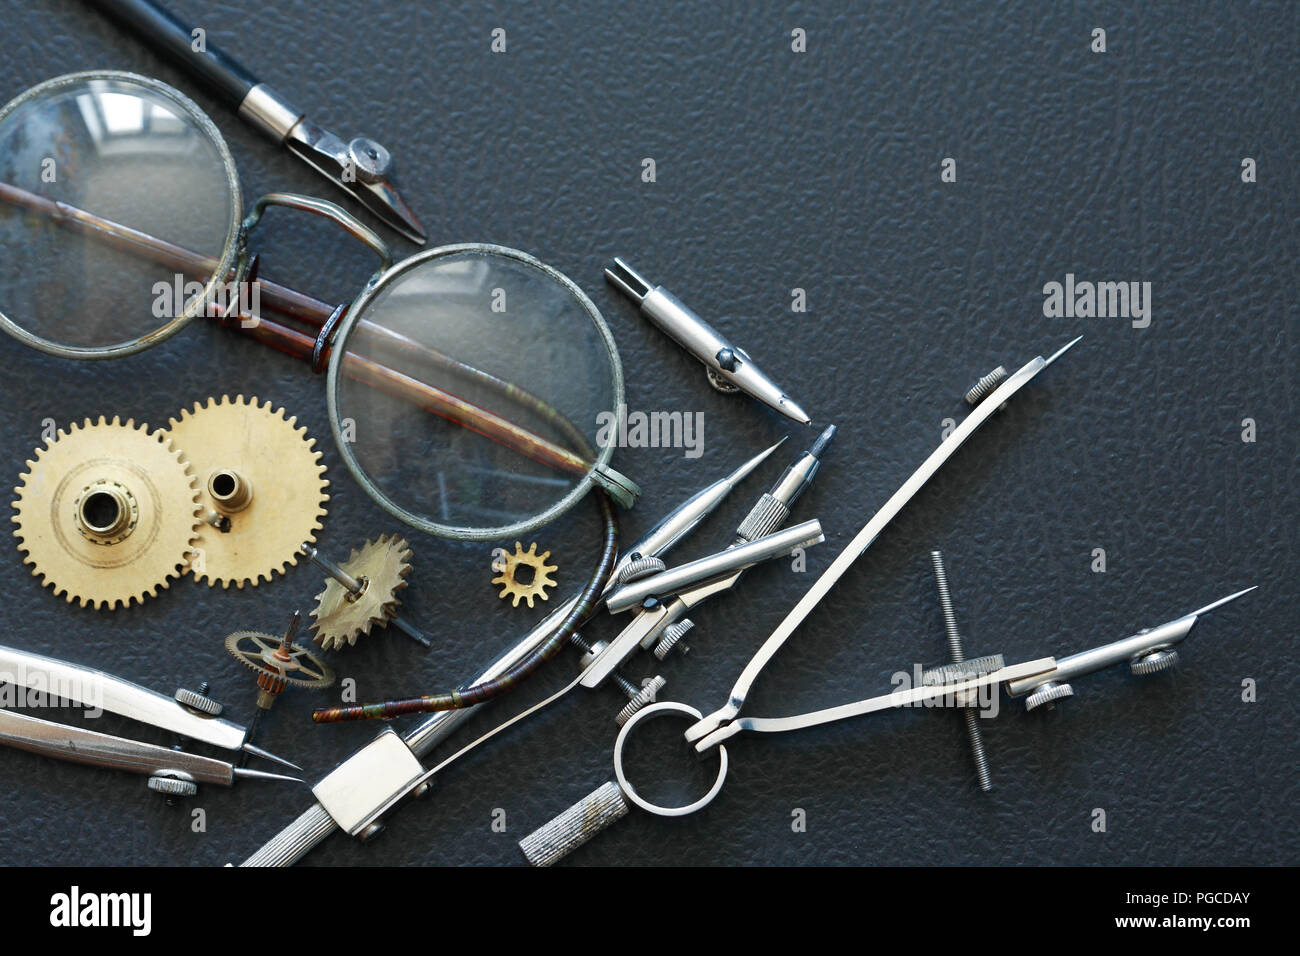 Engineering concept. Set of gears near divider and old spectacles Stock Photo